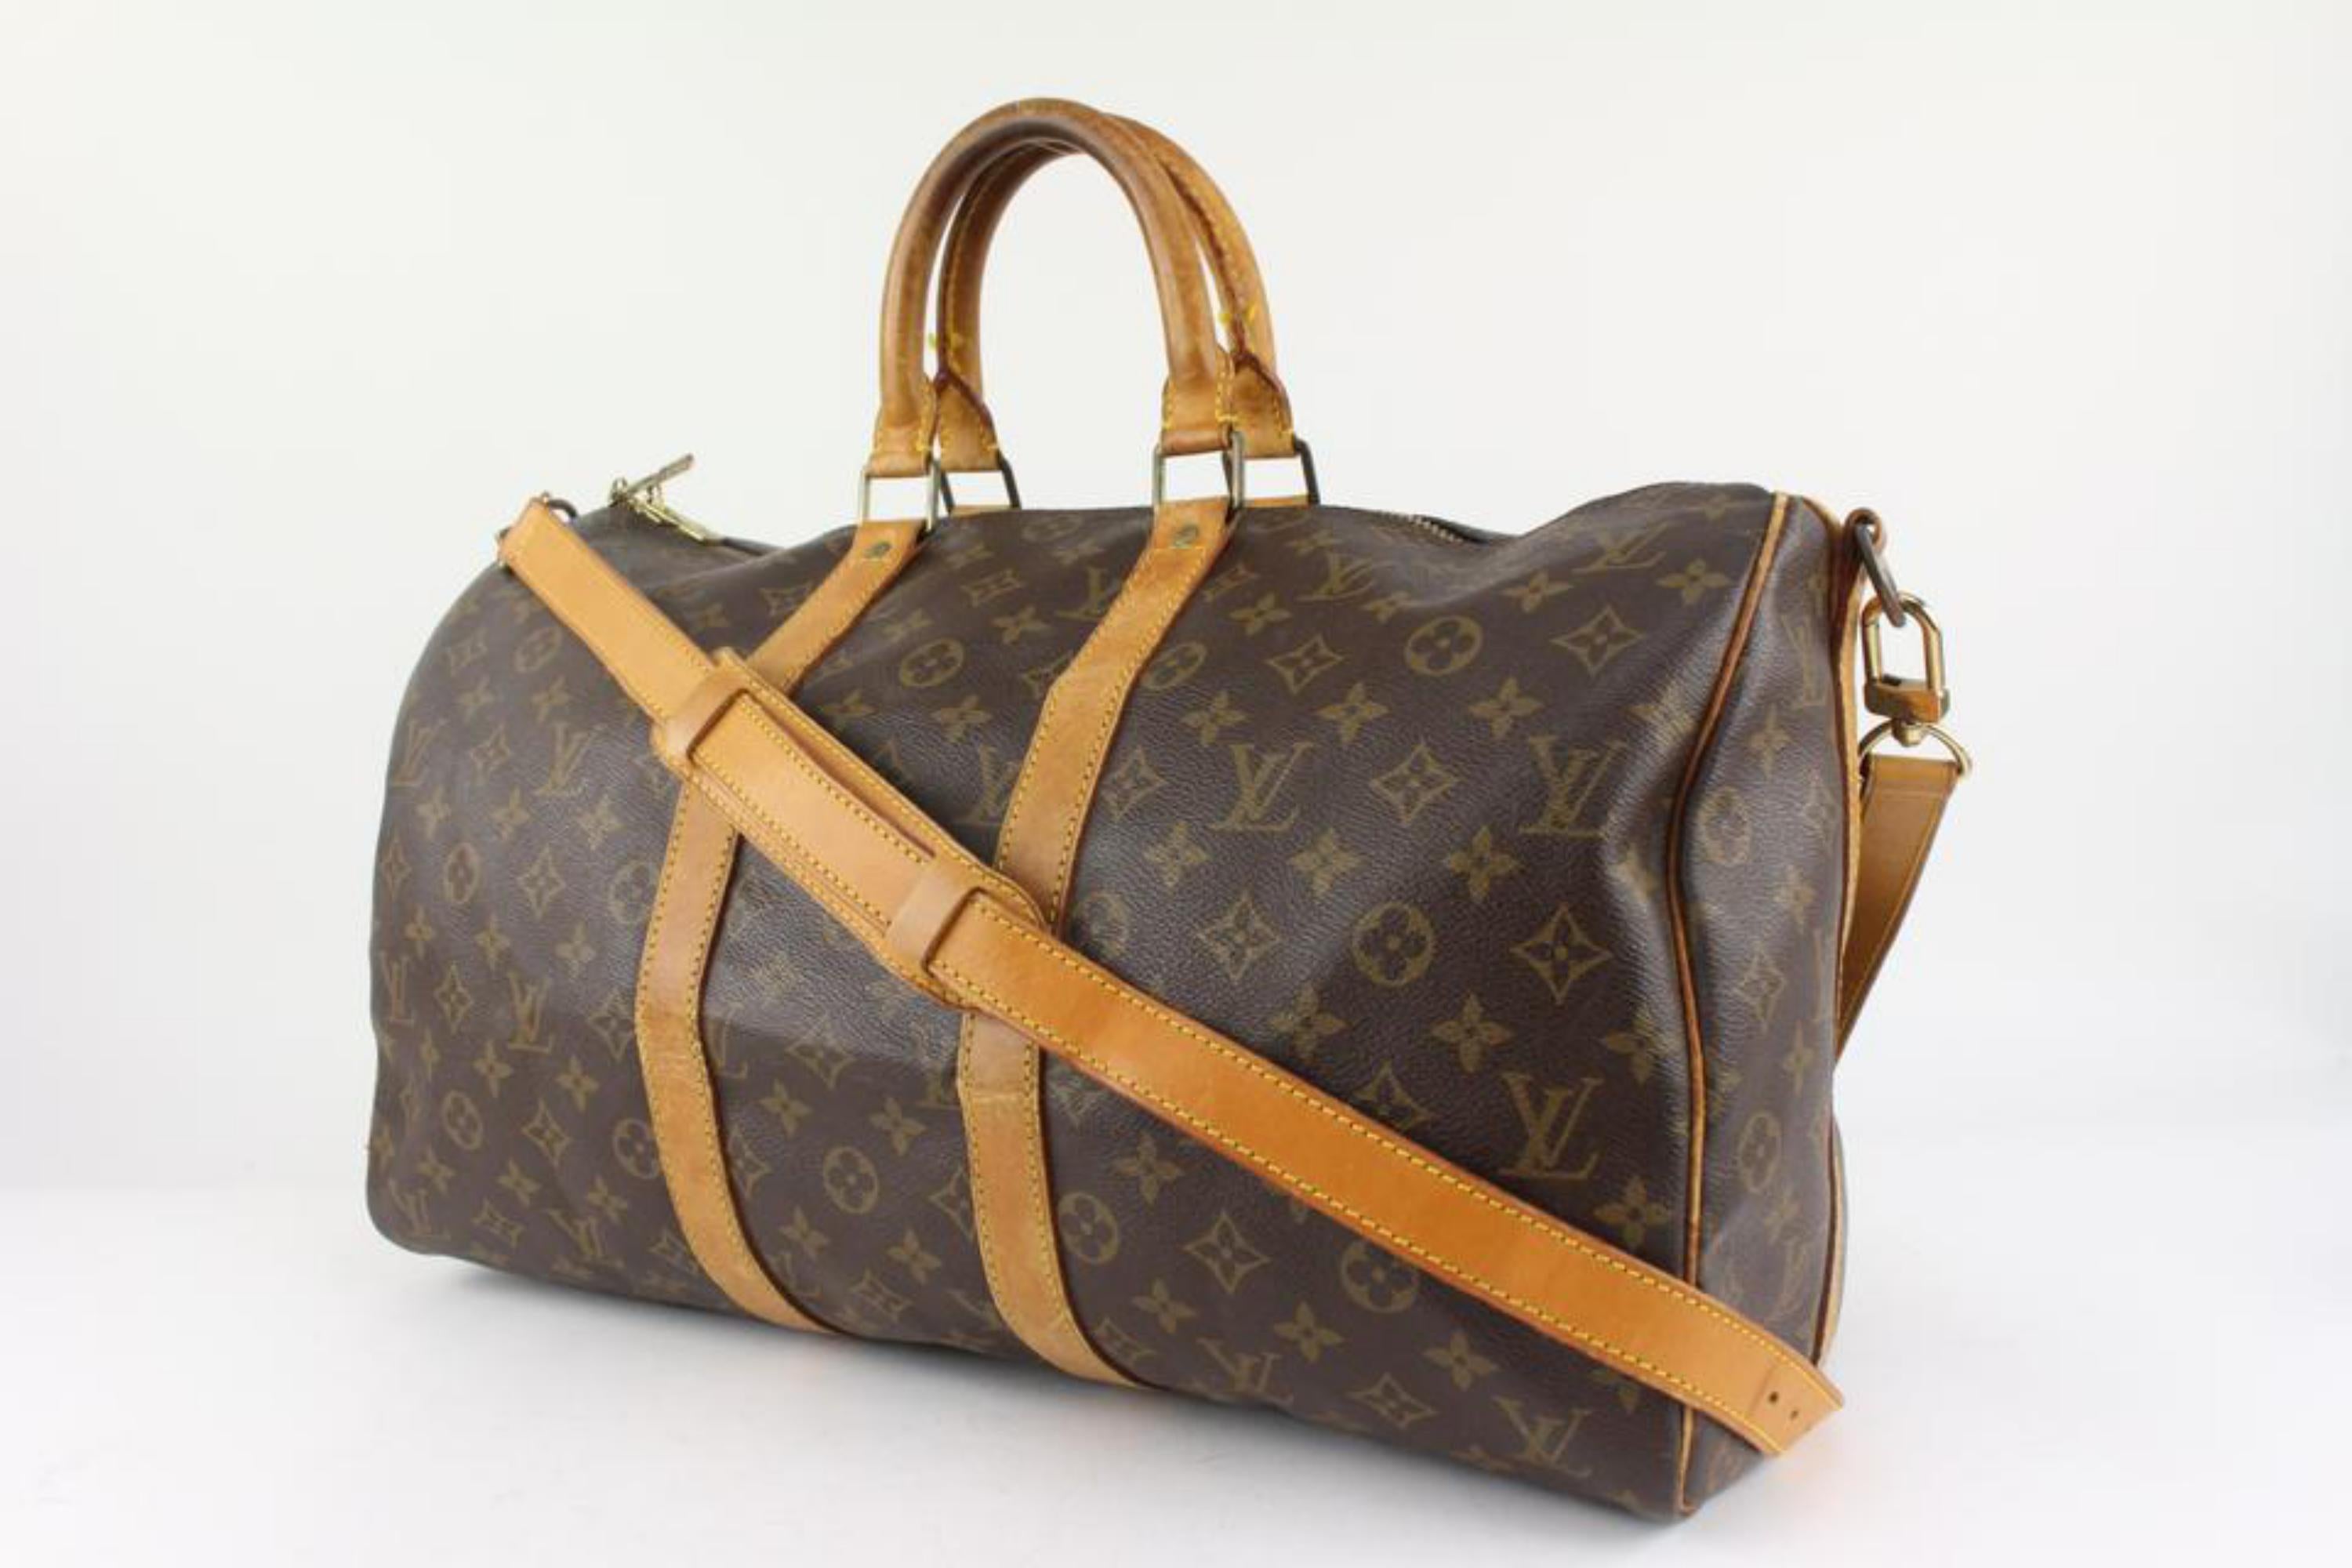 Louis Vuitton Monogram Keepall Bandouliere 45 Duffle Bag with Strap 1122lv11
Date Code/Serial Number: VI0930
Made In: France
Measurements: Length:  18